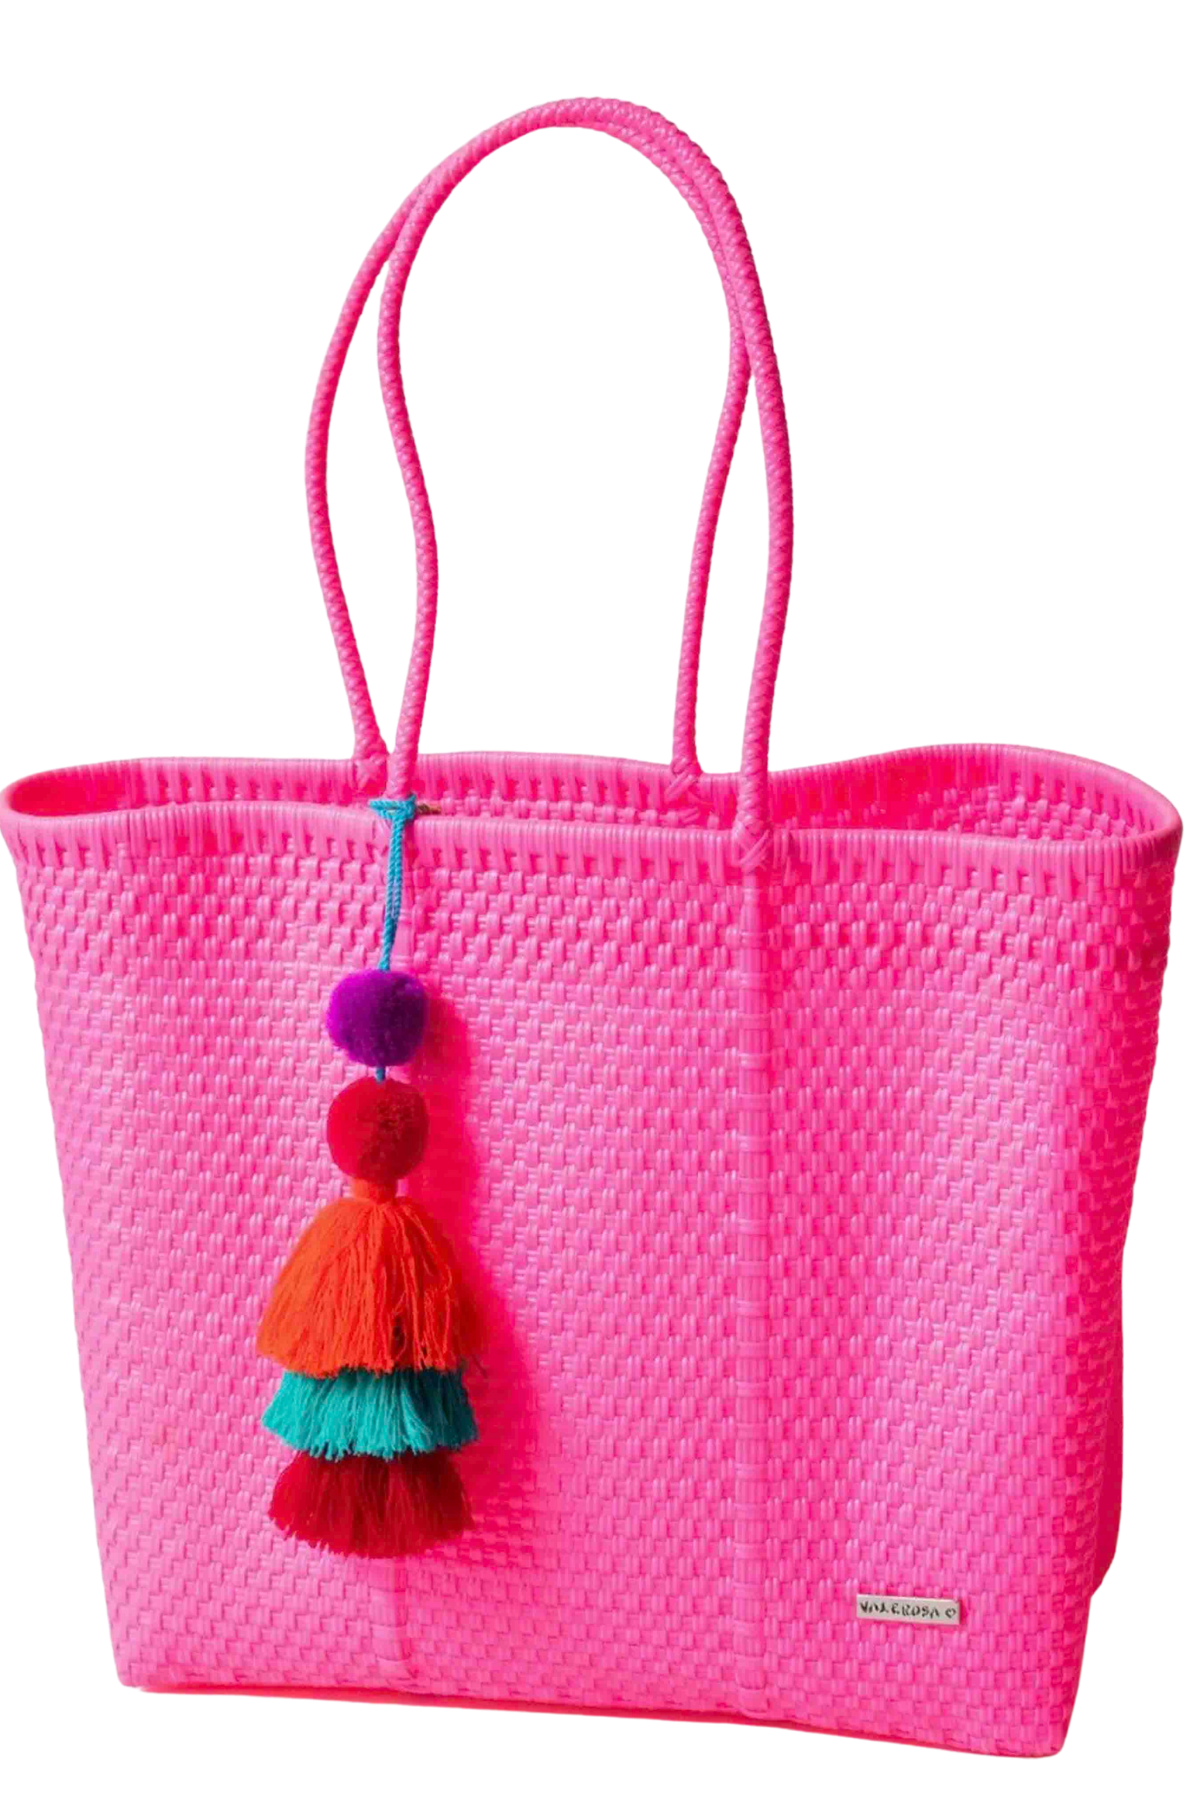 Hot Pink Playera Tote by Valerosa Boutique